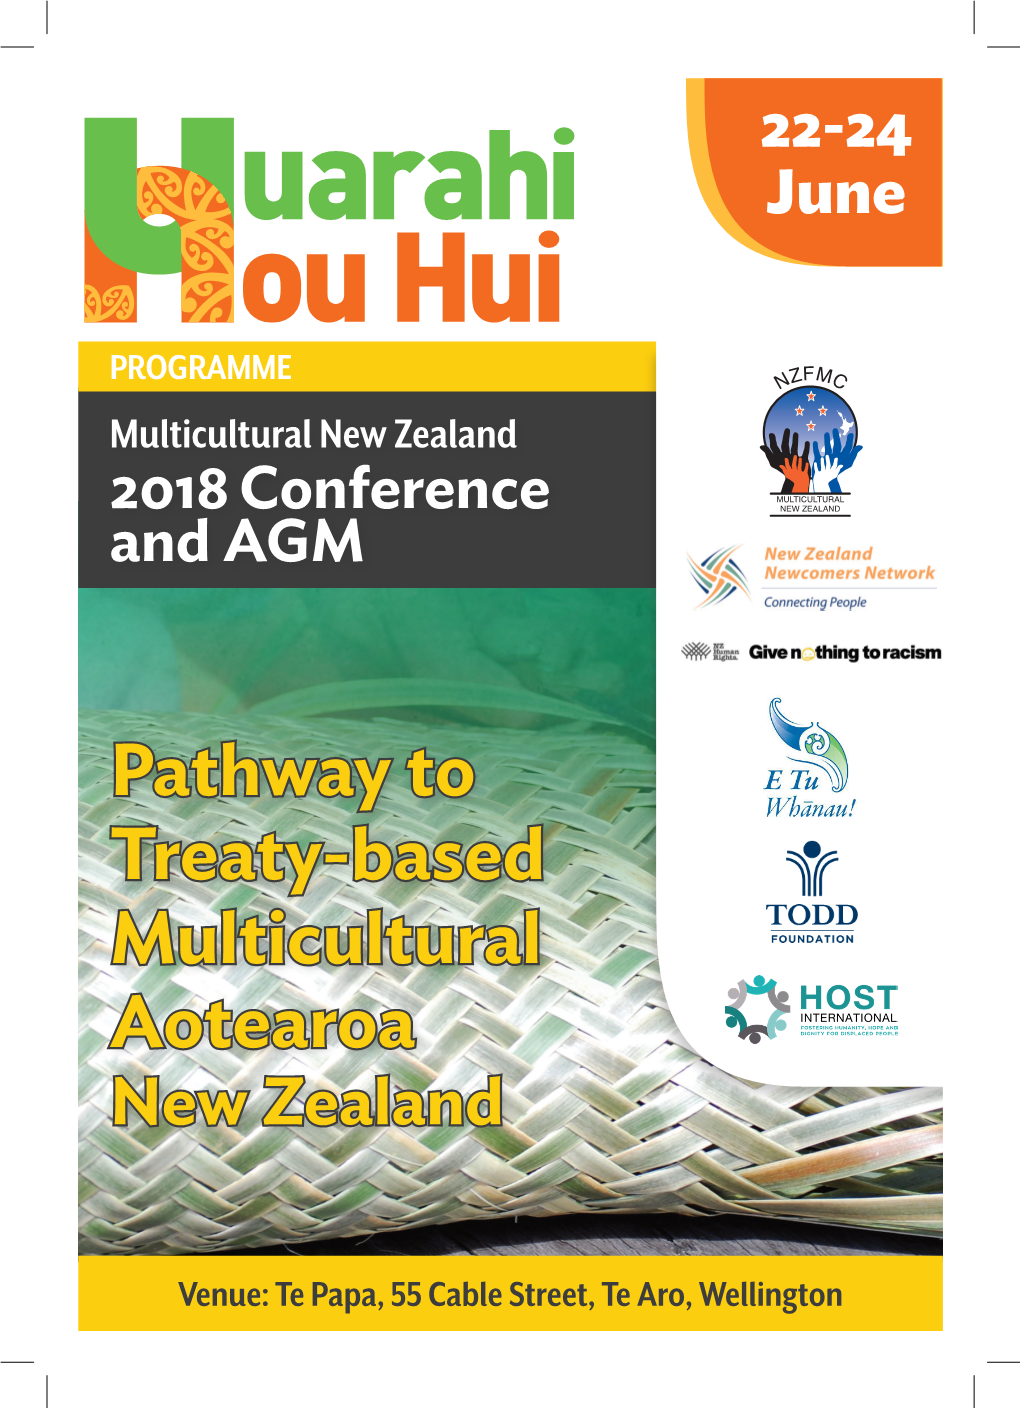 Multicultural New Zealand 2018 Conference and AGM